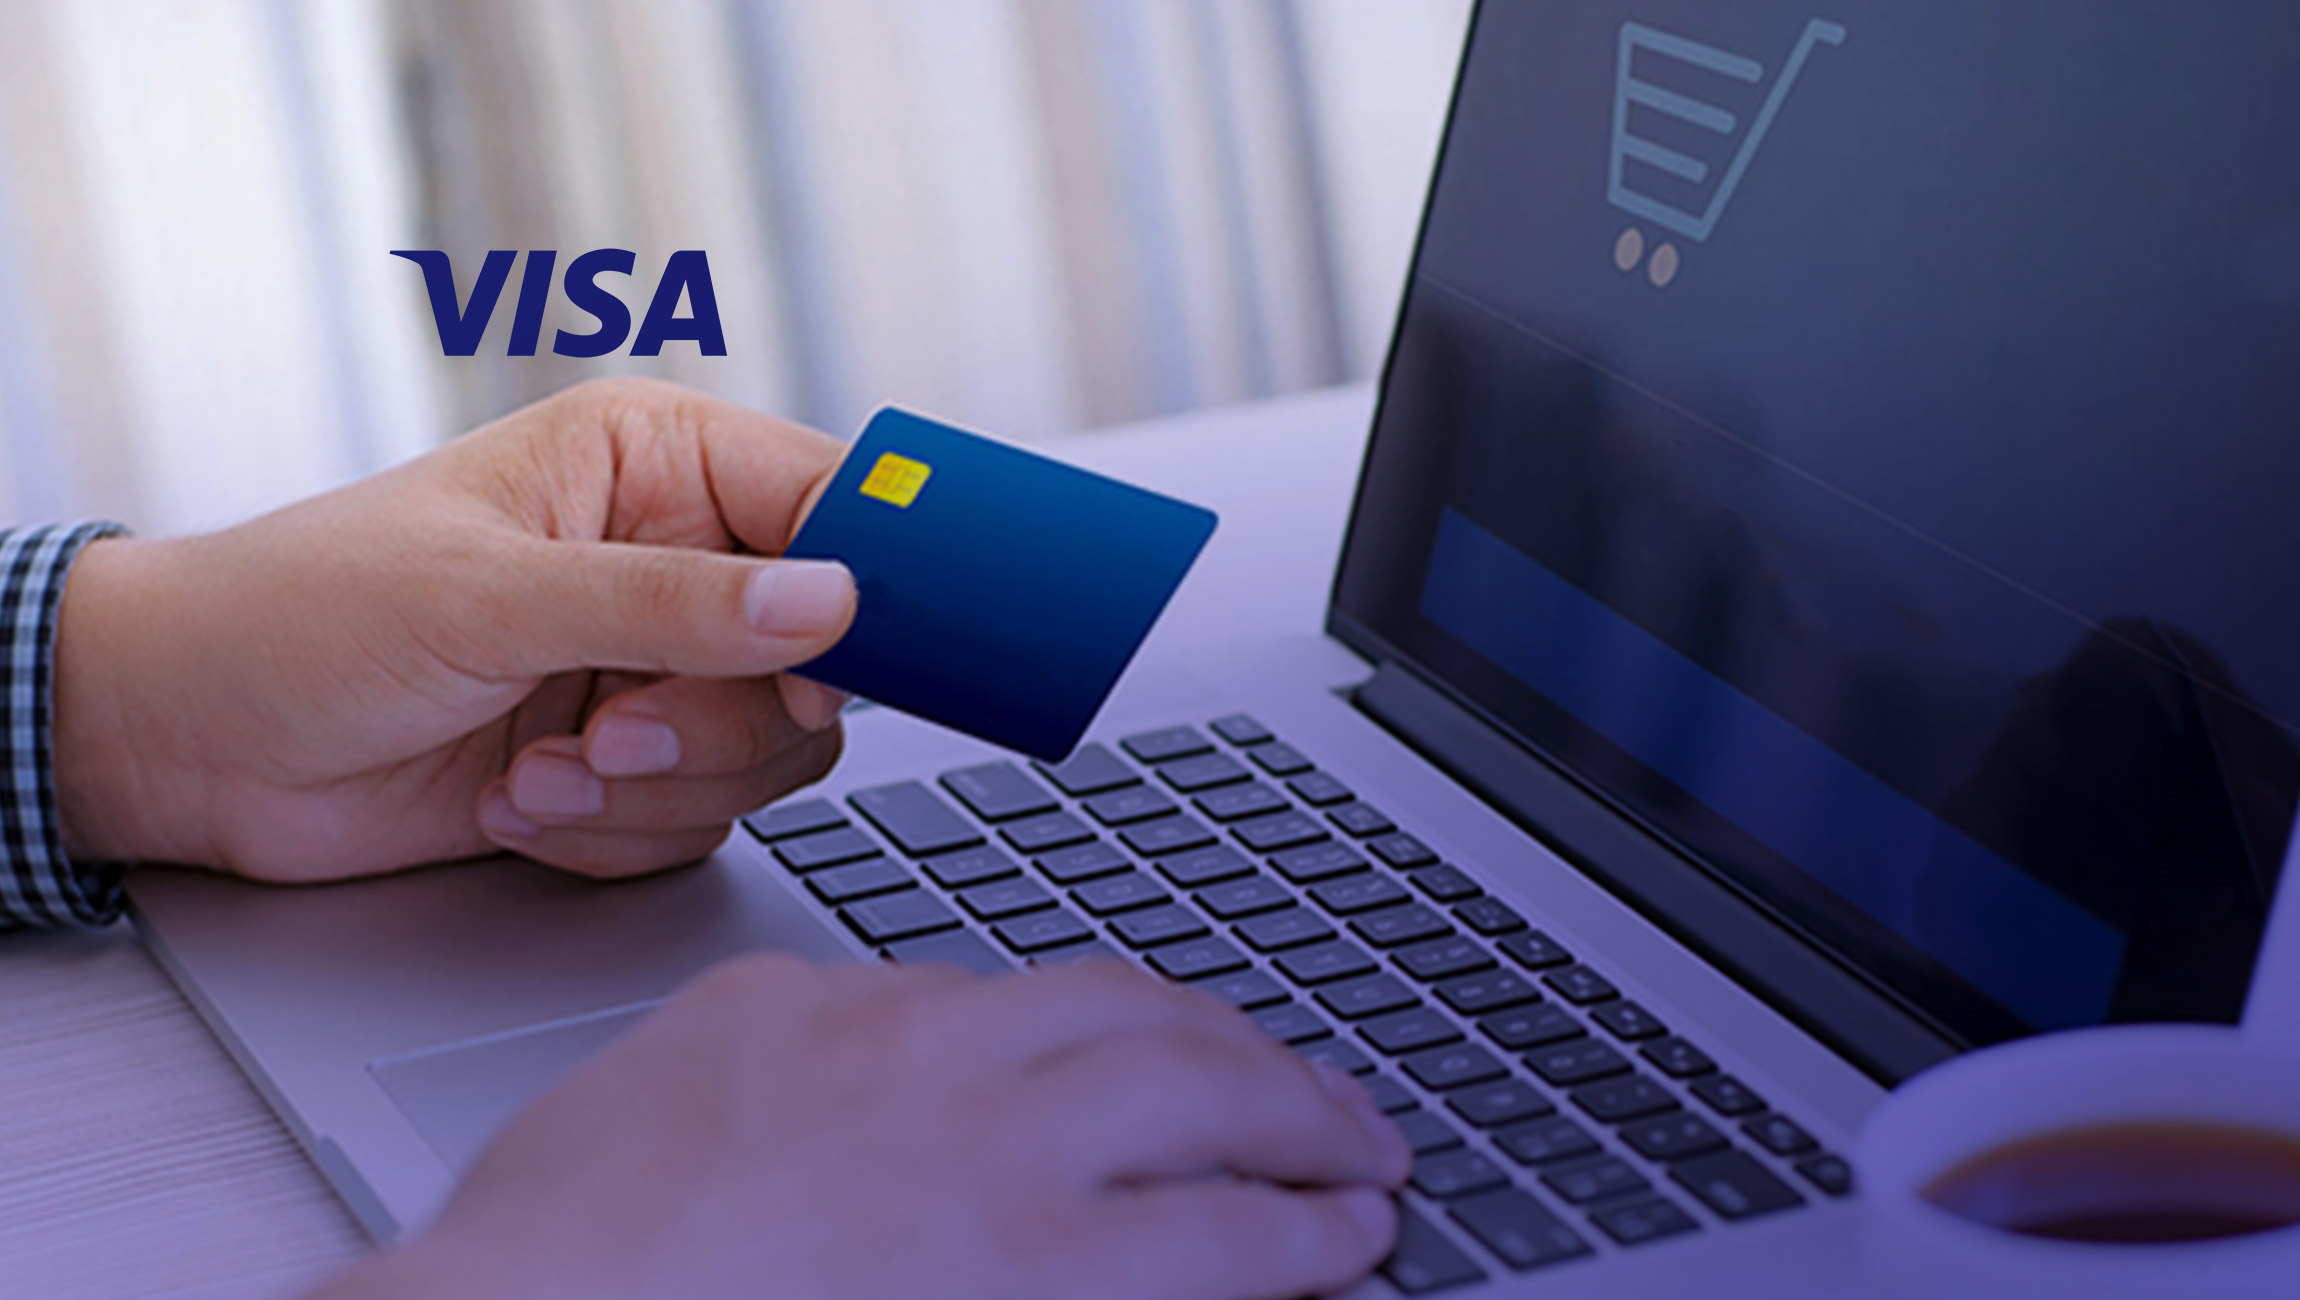 One Billion Additional Touchfree Visa Payments Made